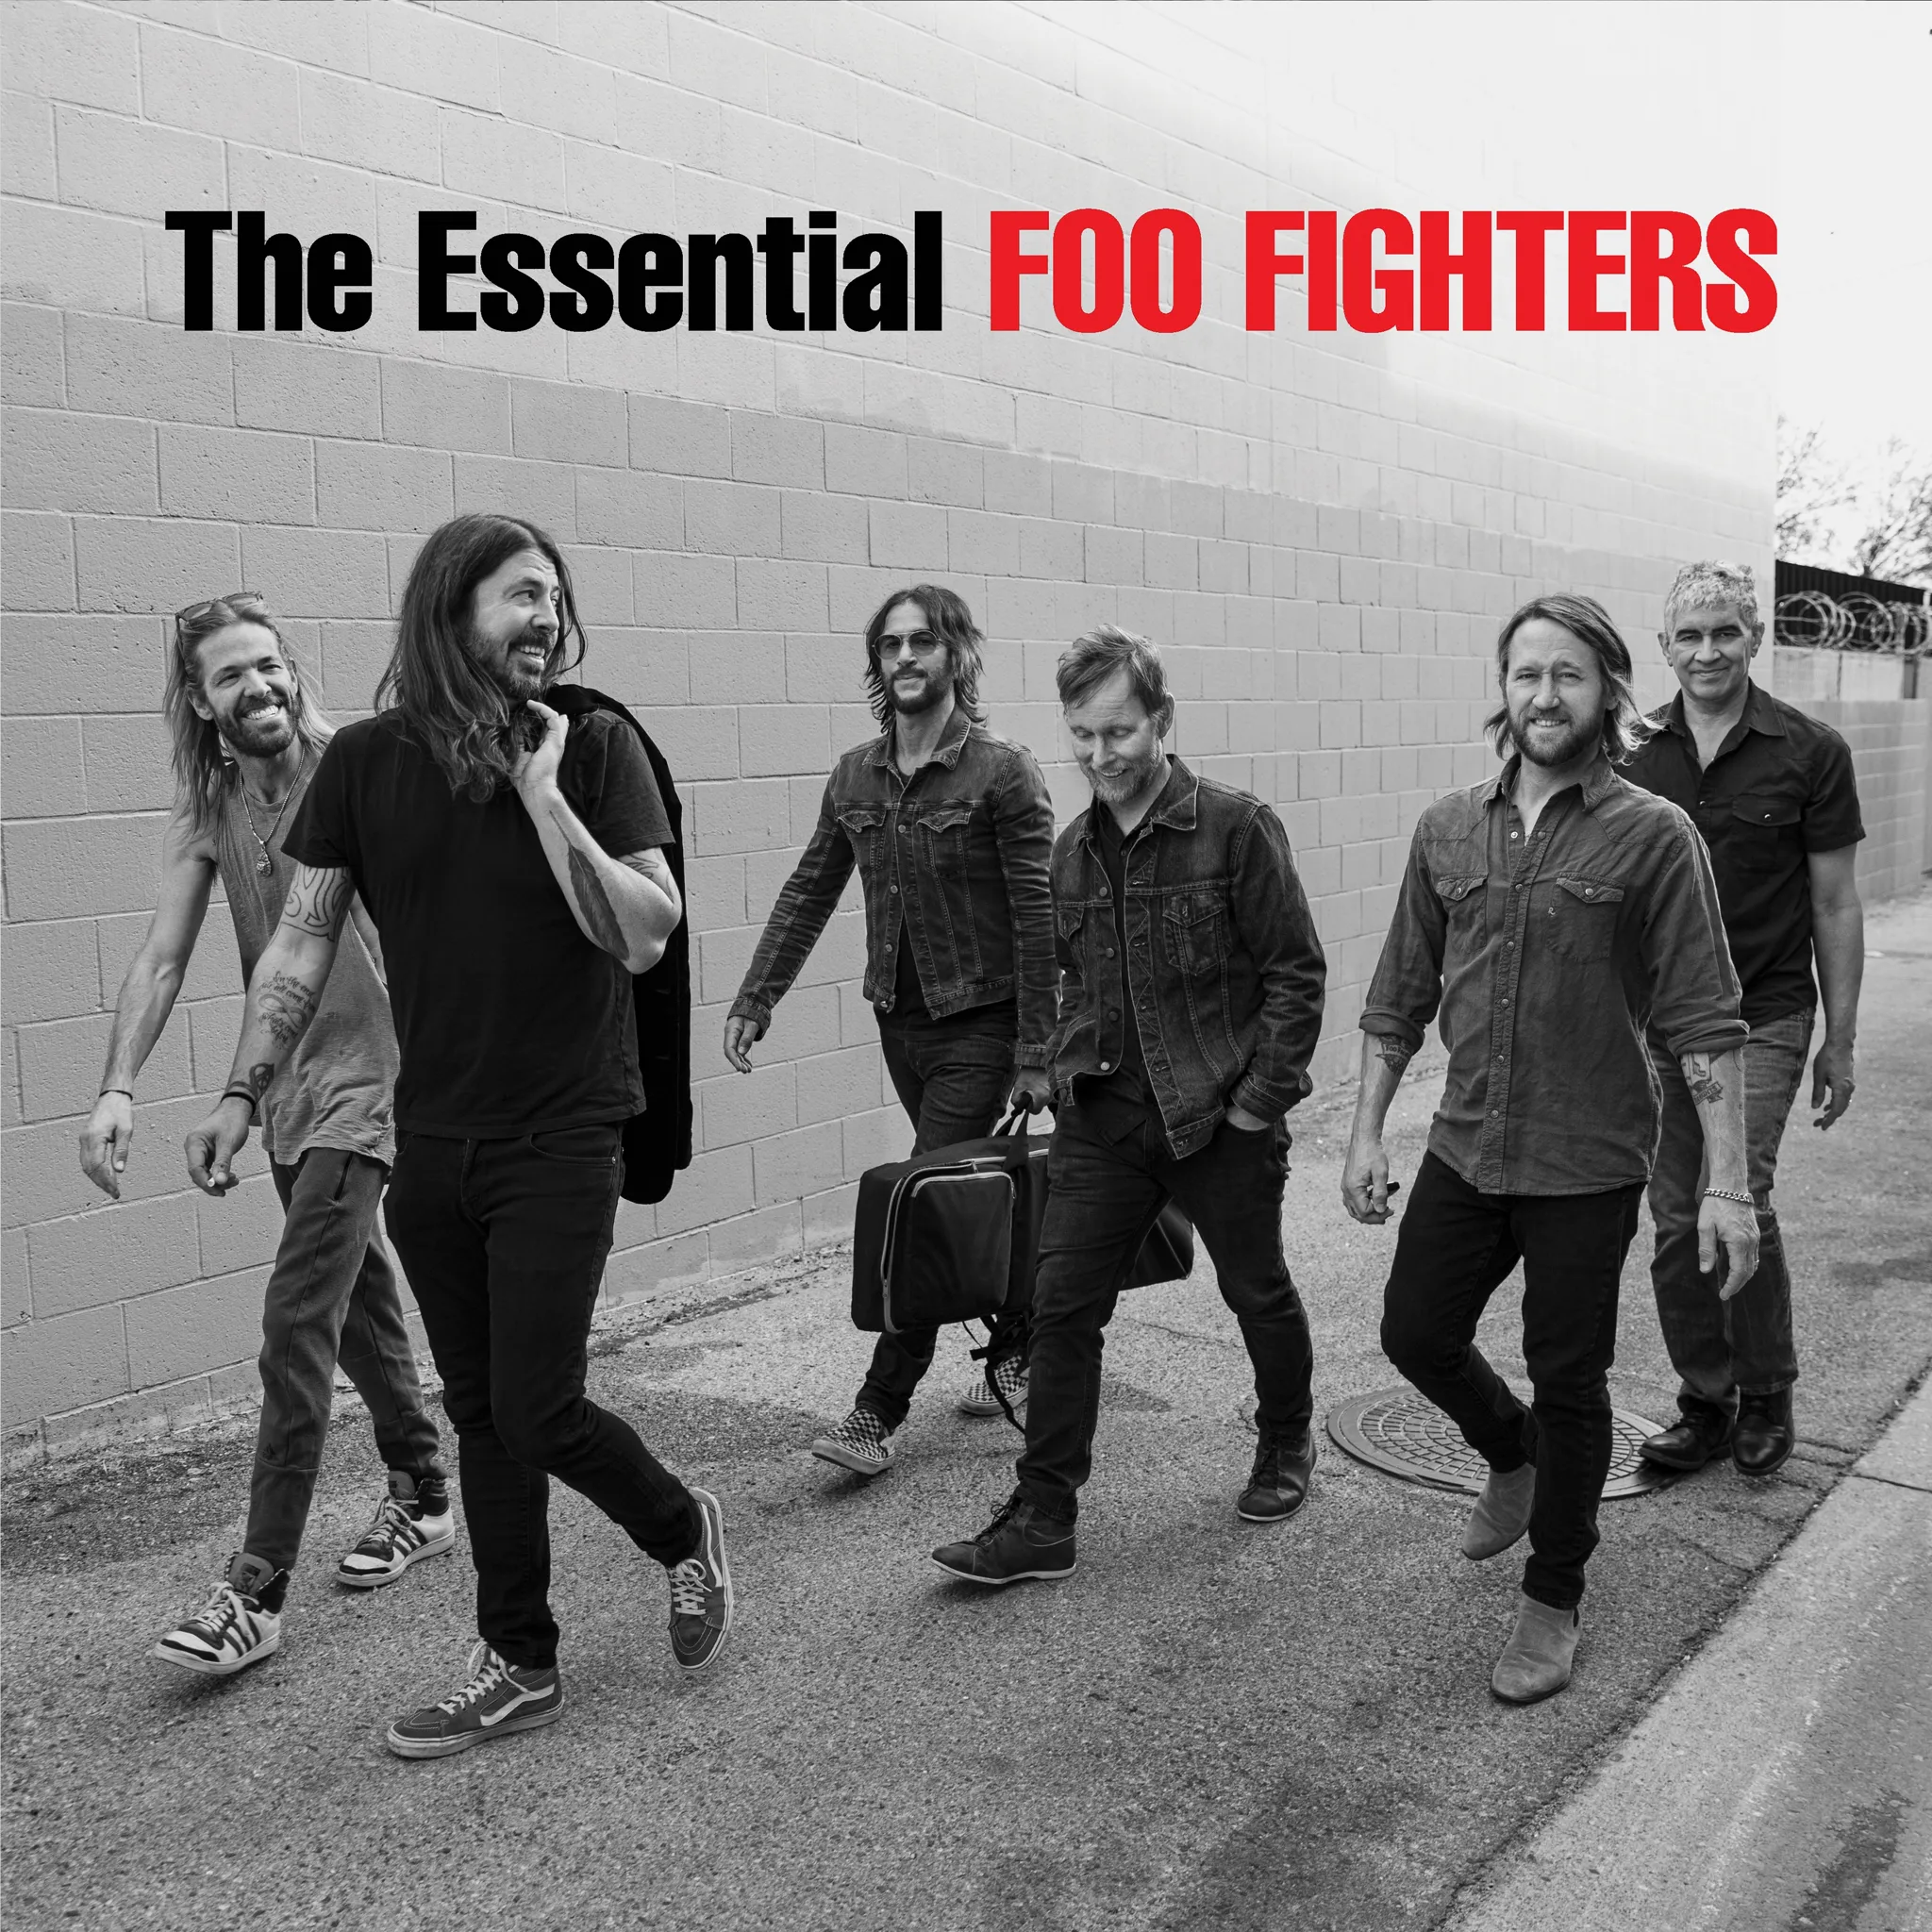 <strong>Foo Fighters - The Essential Foo Fighters</strong> (Vinyl LP - black)